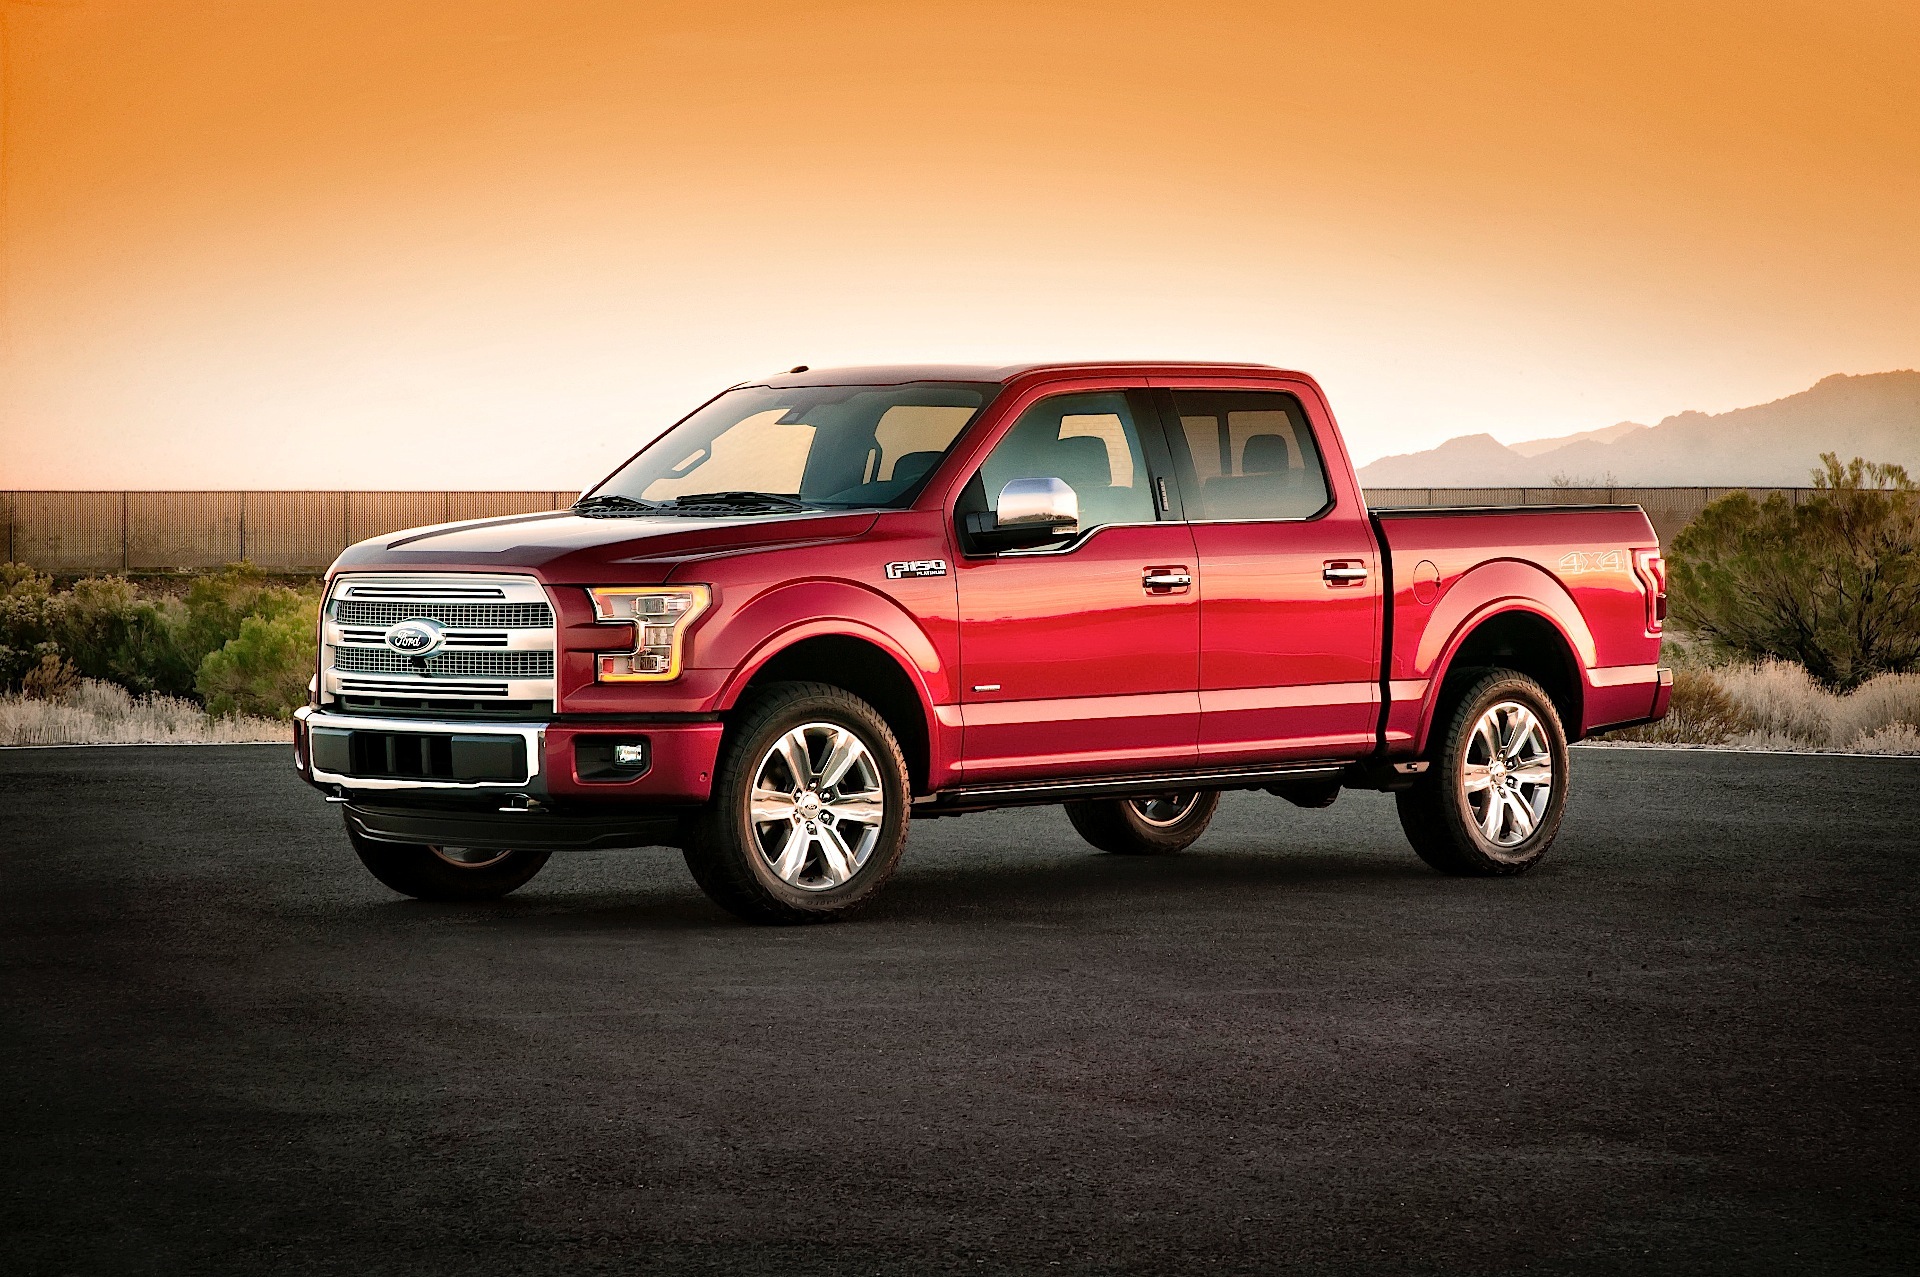 FORD F-150 Super Crew specs & photos - 2014, 2015, 2016, 2017, 2018 2011 Ford F 150 5.0 Towing Capacity